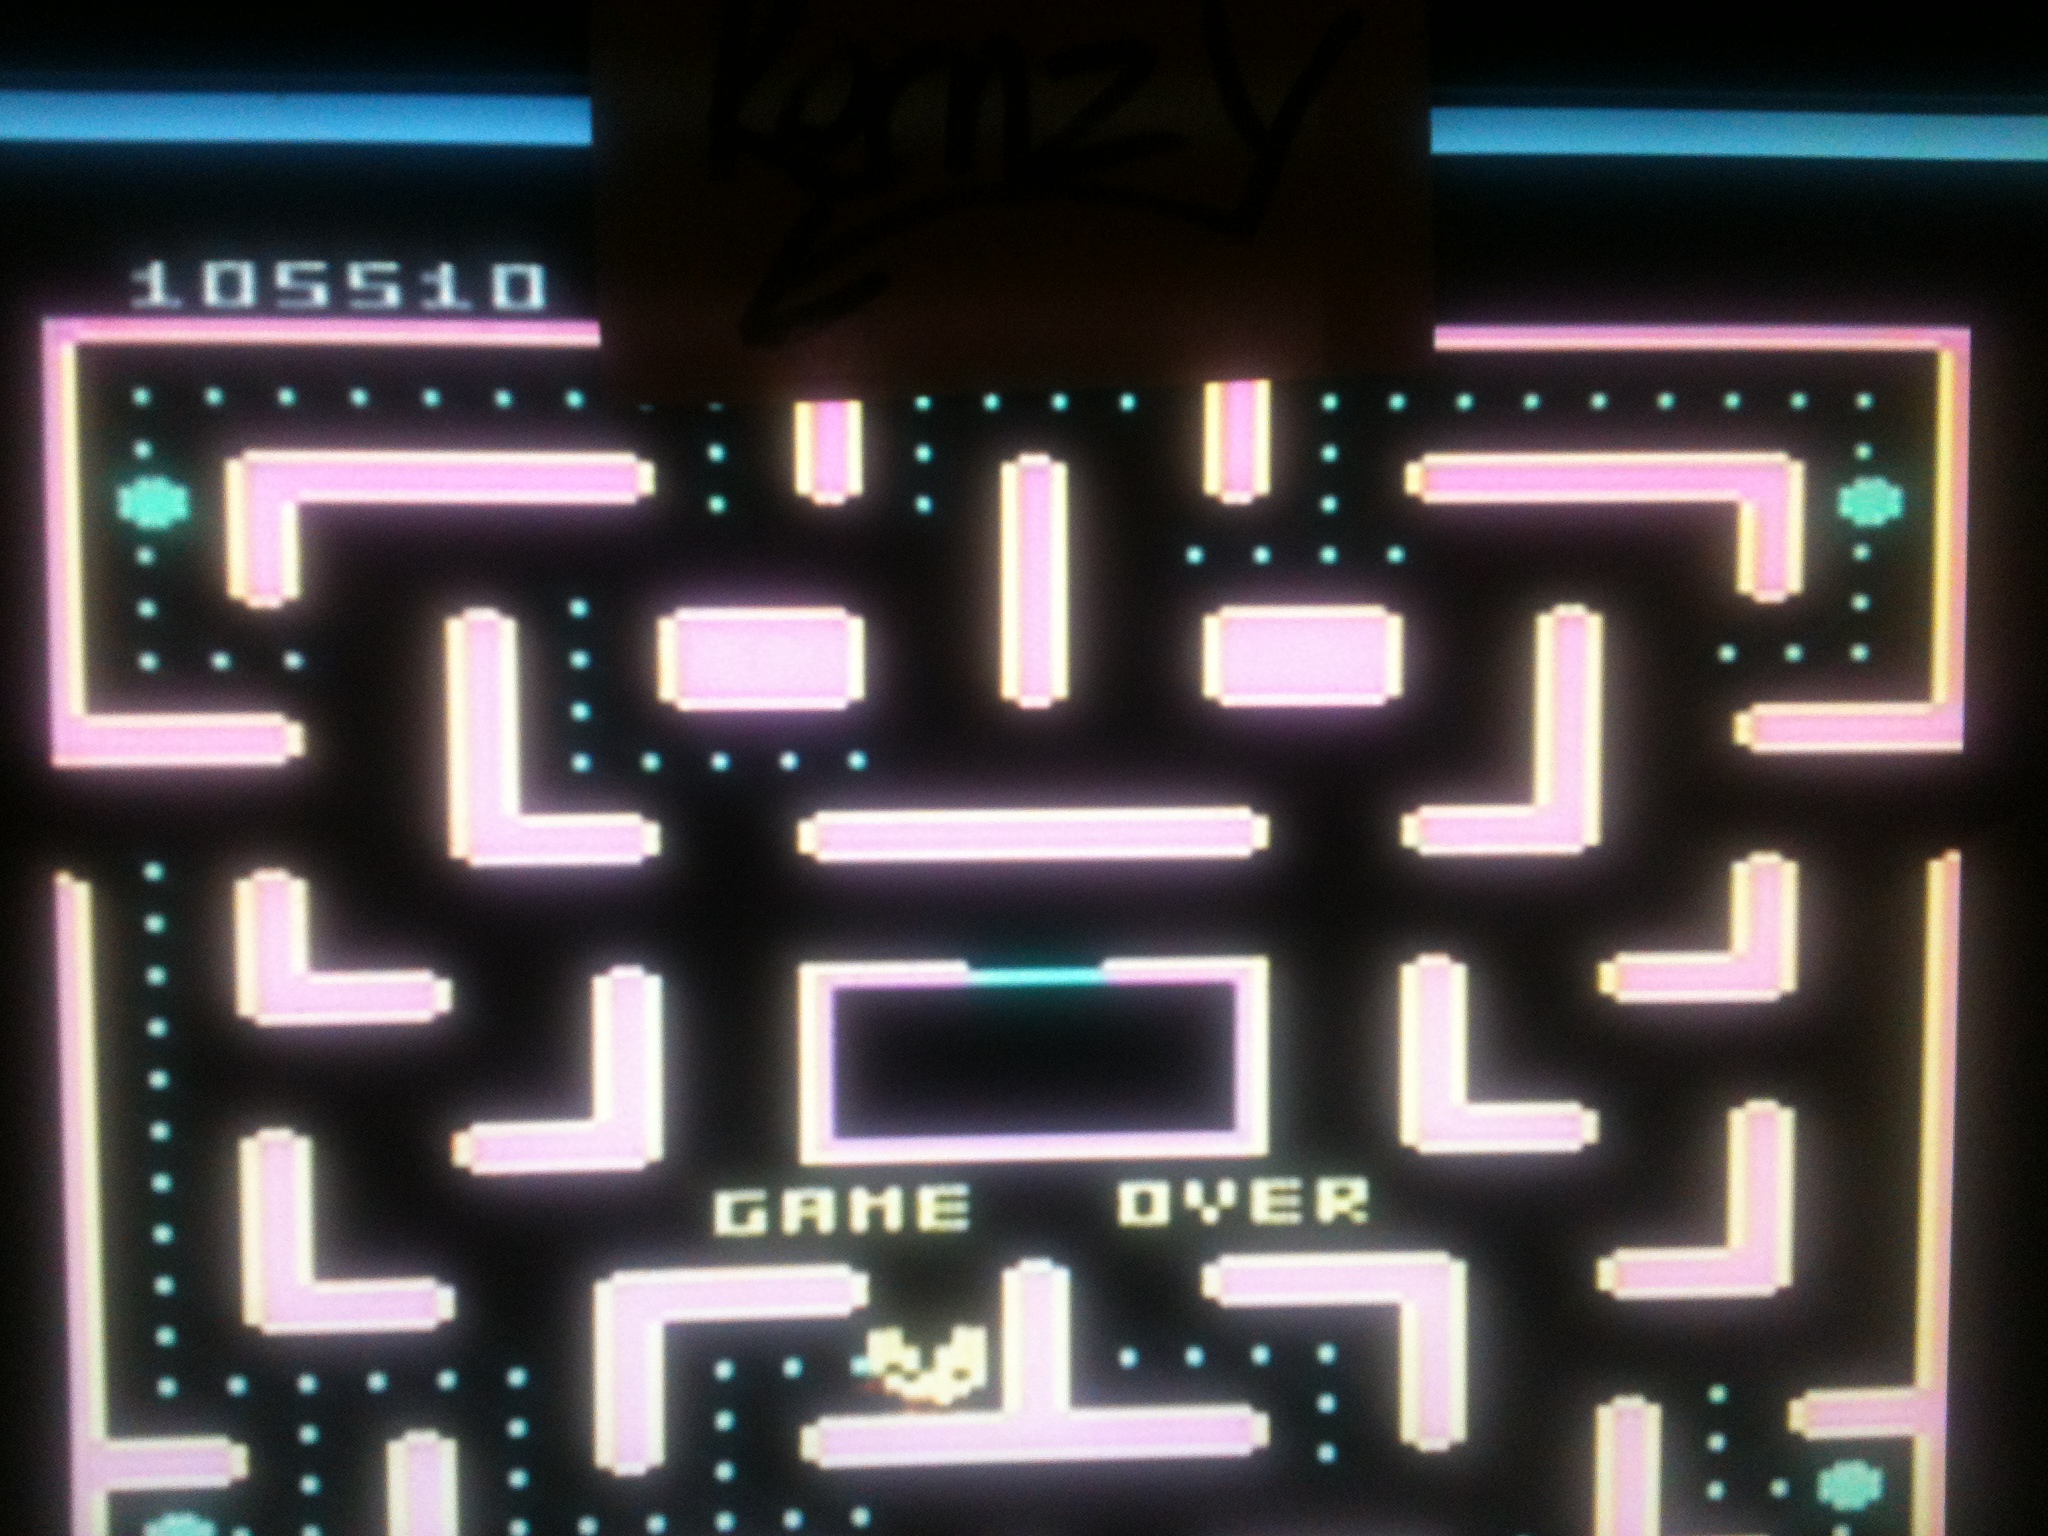 kernzy: Pac-Man Collection: Ms. Pac-Man [Apple/Plus Off/Fast Button] (Atari 7800 Emulated) 105,510 points on 2014-12-10 11:25:12